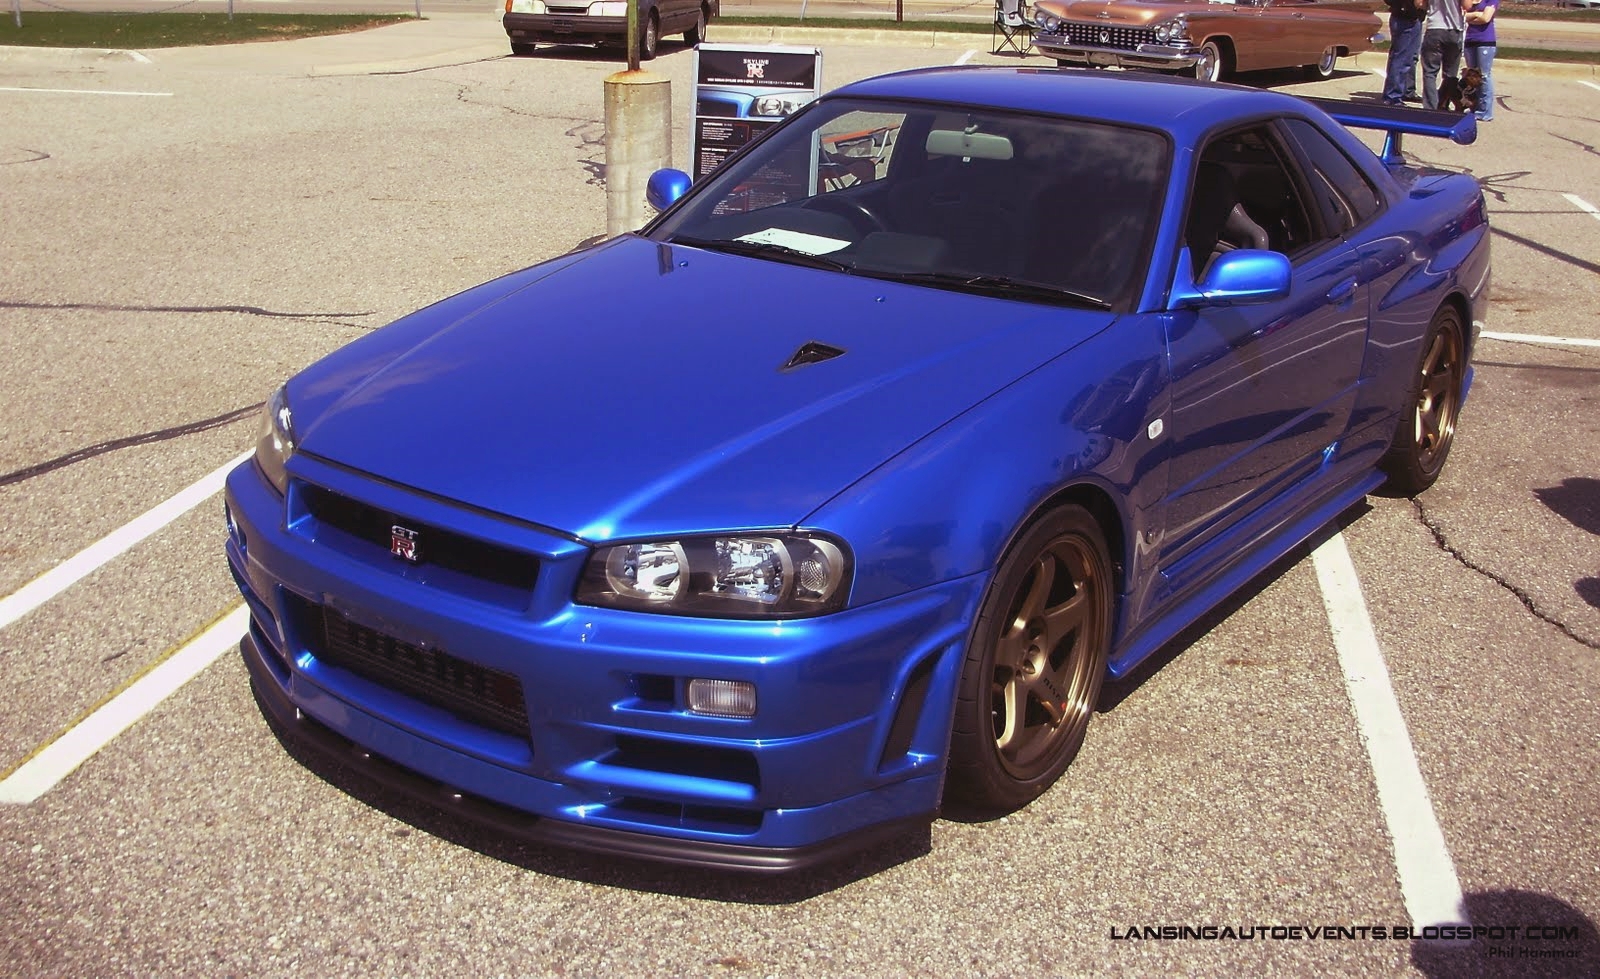 From The Archives 2011 Msu Car Show 1999 Nissan Skyline Gt R